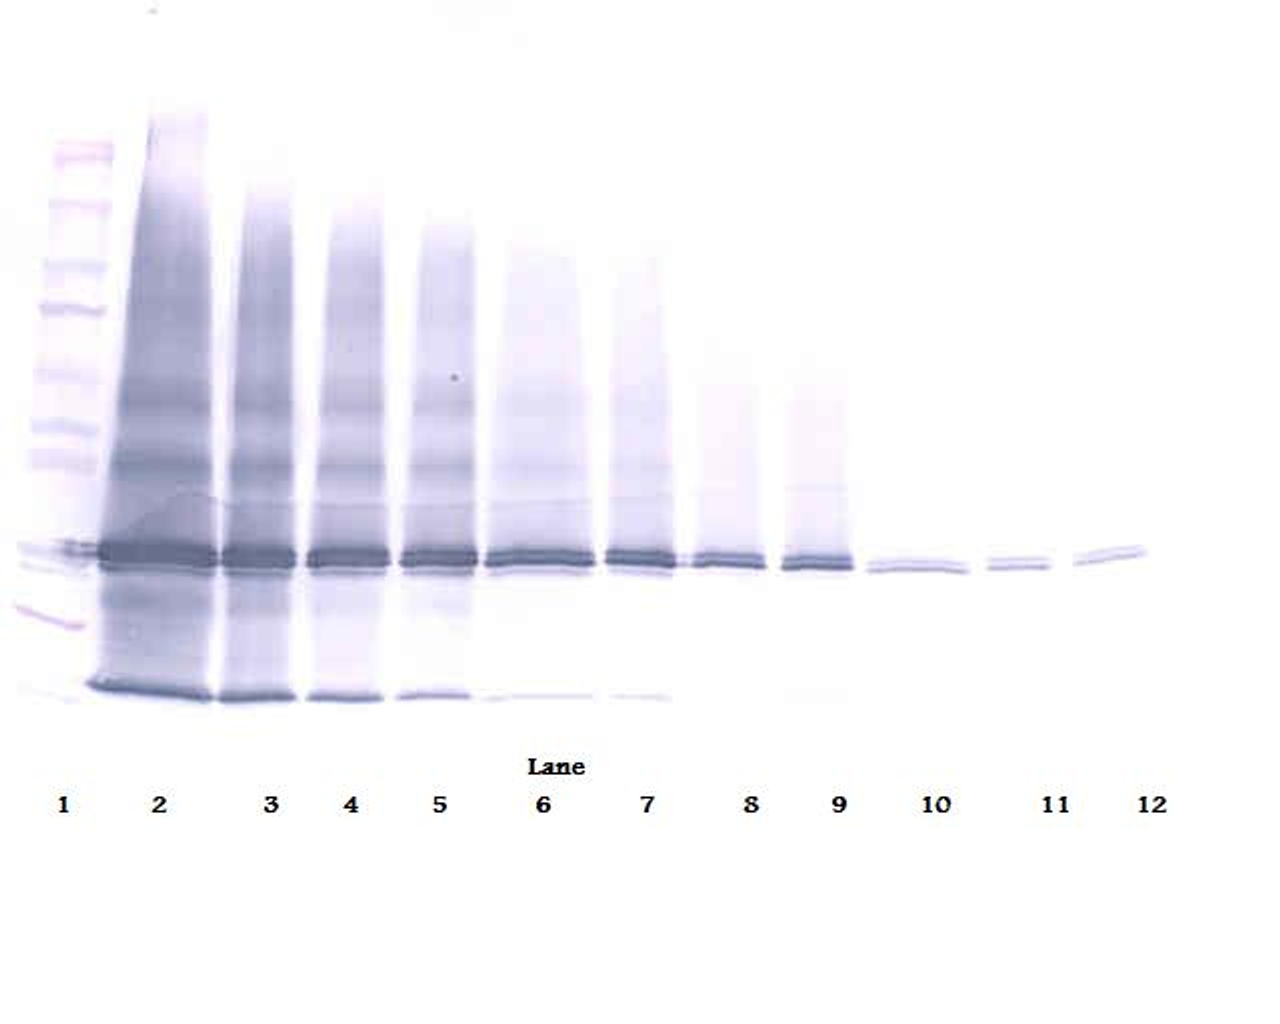 To detect Human IL-17E by Western Blot analysis this antibody can be used at a concentration of 0.1 - 0.2 ug/ml. When used in conjunction with compatible secondary reagents the detection limit for recombinant Human IL-17E is 1.5 - 3.0 ng/lane, under either reducing or non-reducing conditions.